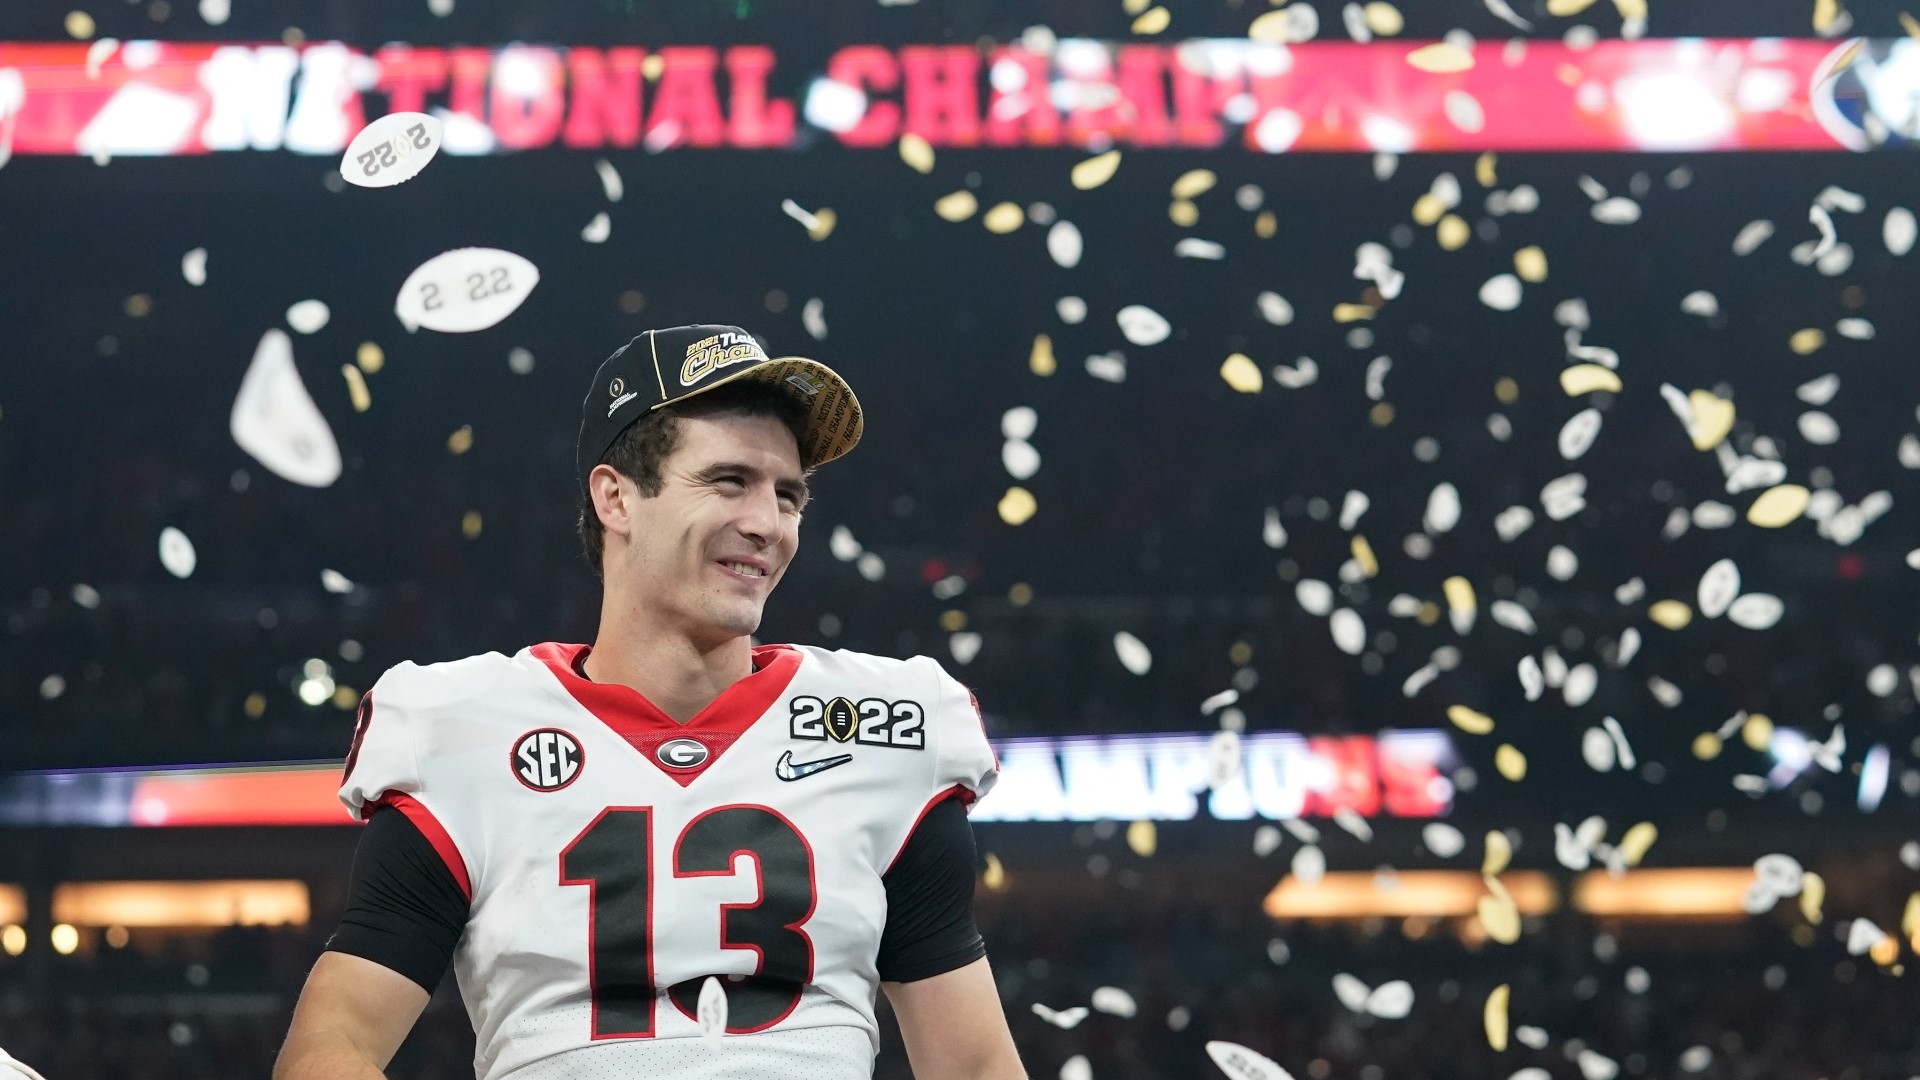 We spoke to his proud mom right after the College Football Playoff National Championship Game.